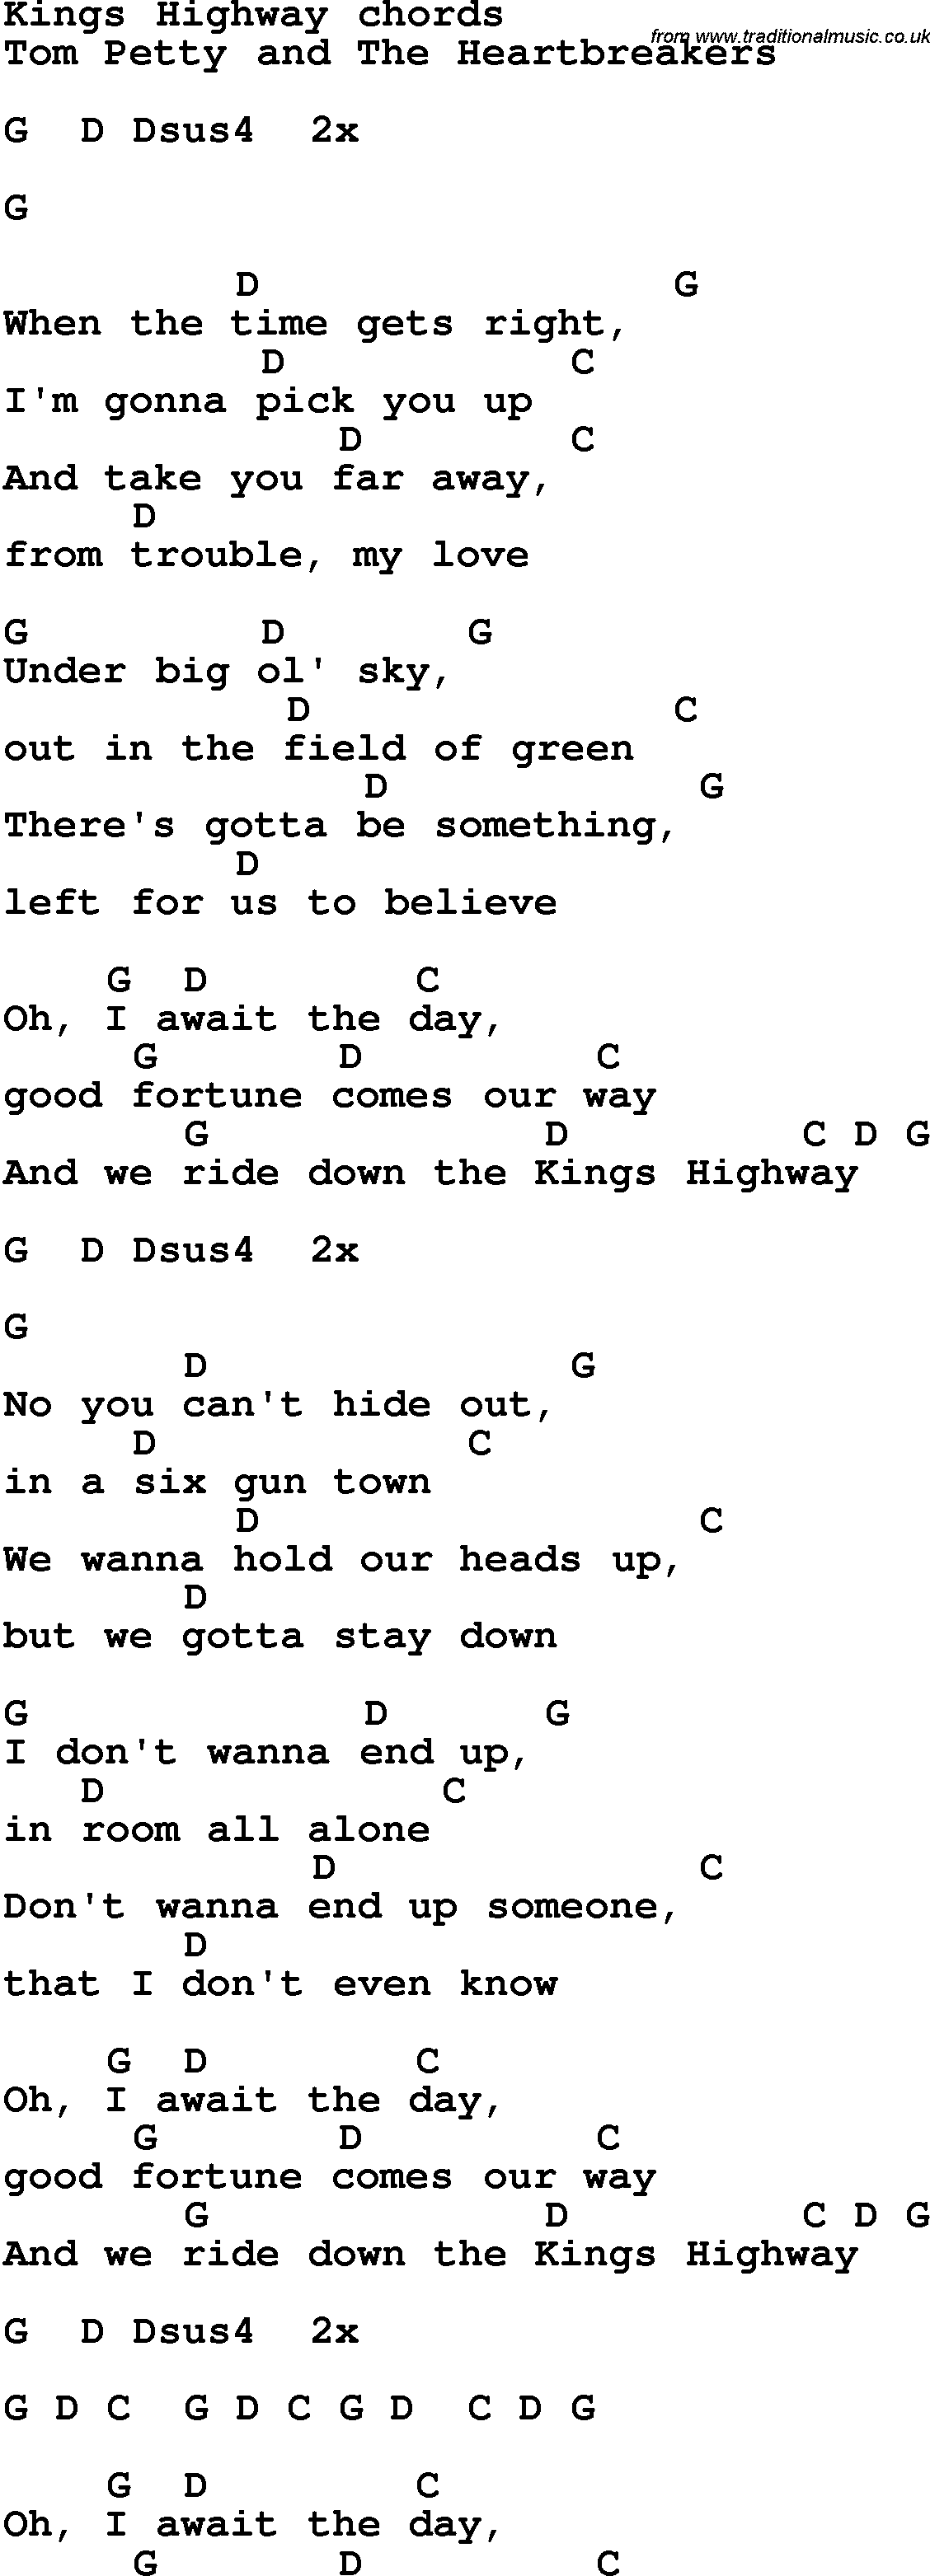 Song Lyrics with guitar chords for Kings Highway